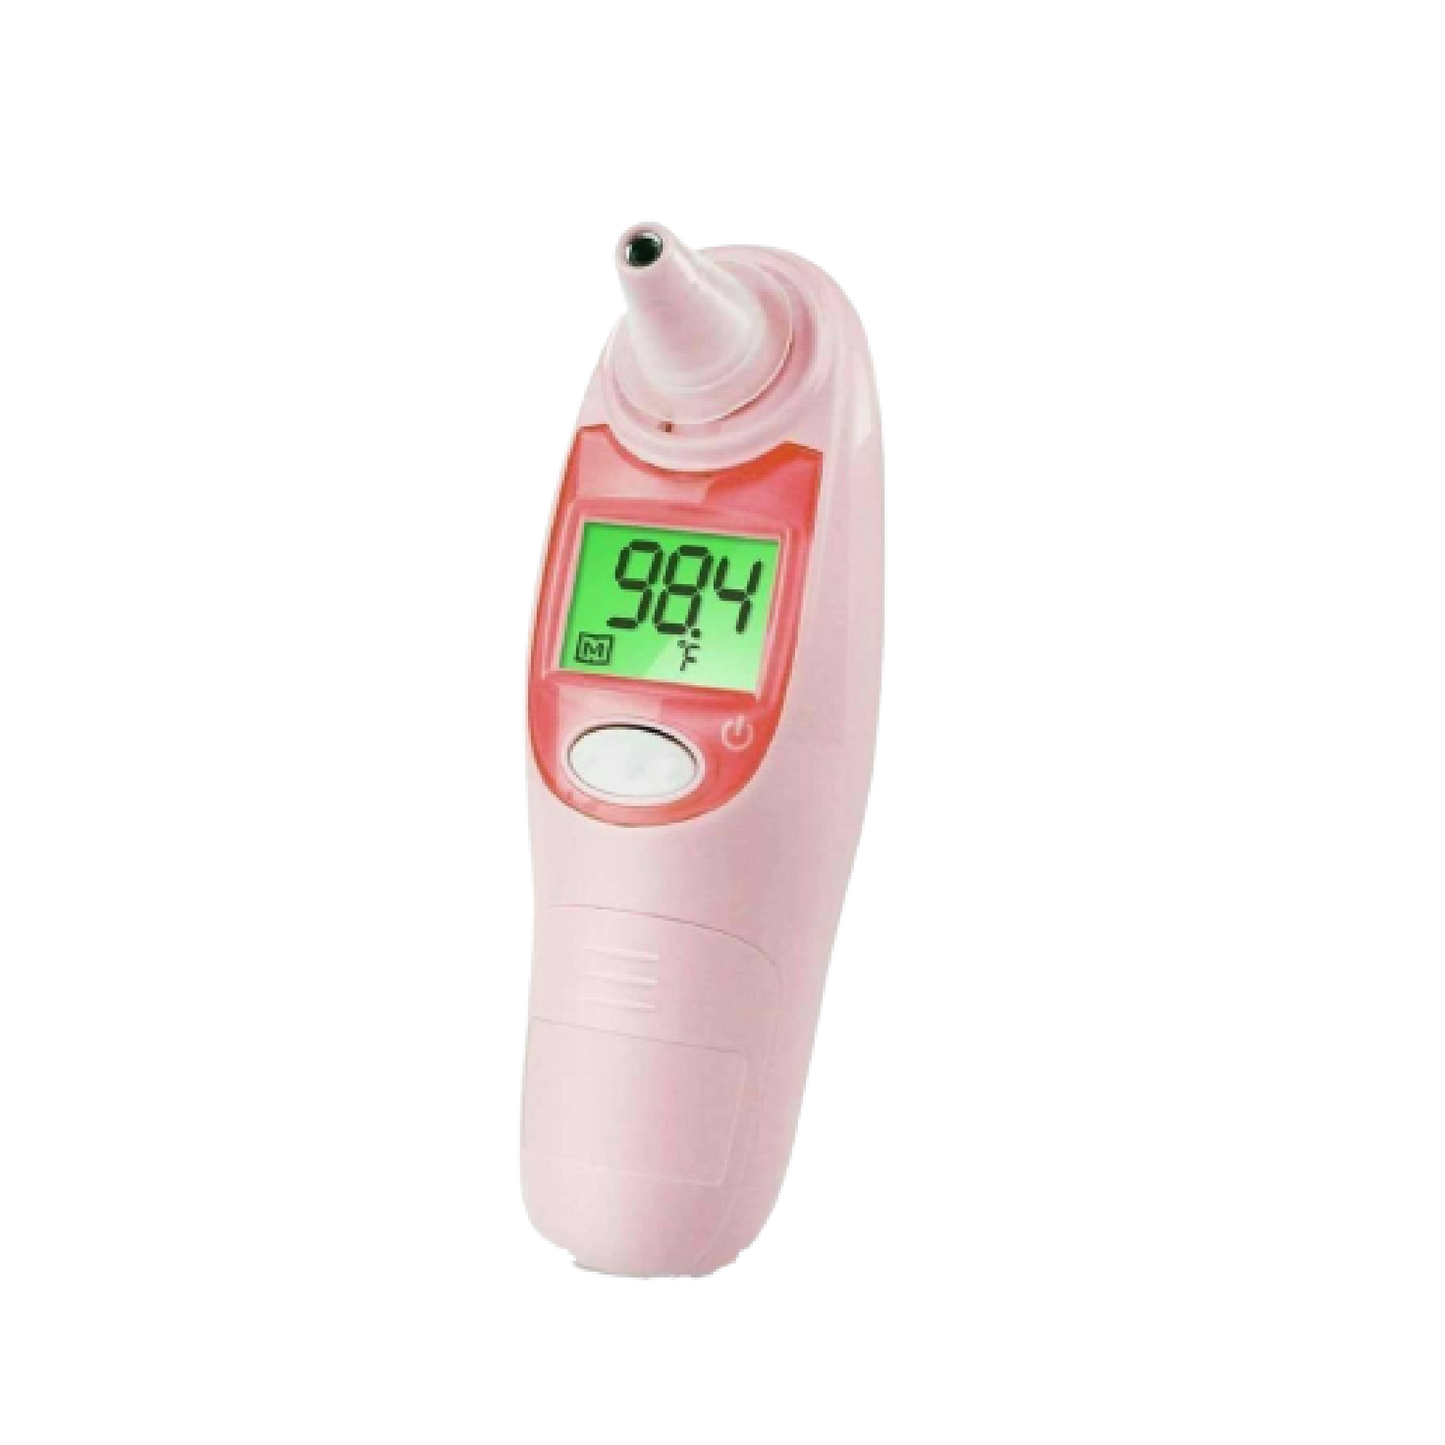 FORA Medical Grade IR18 Infrared Ear Digital Thermometer with 20 Free Bonus Probe Covers